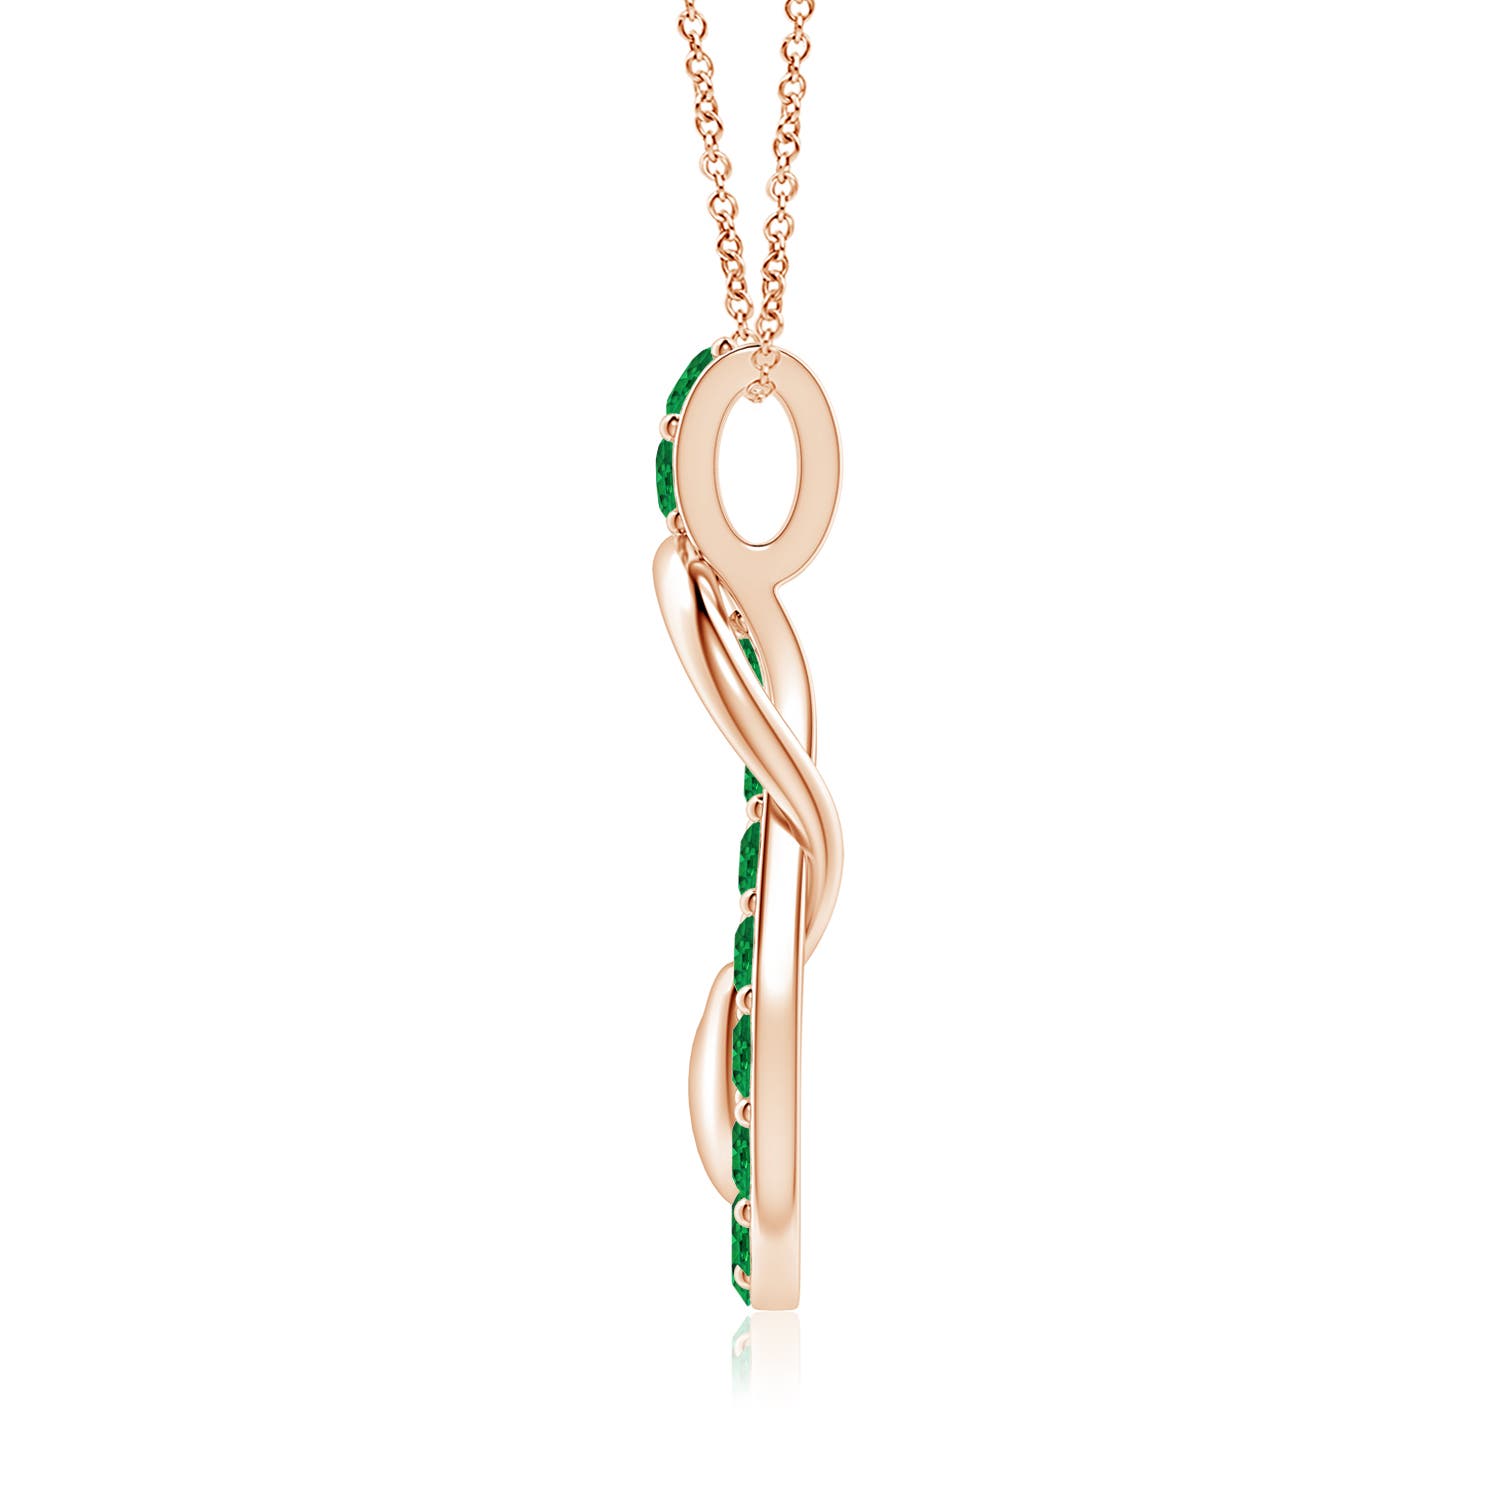 AAA - Emerald / 2.85 CT / 14 KT Rose Gold